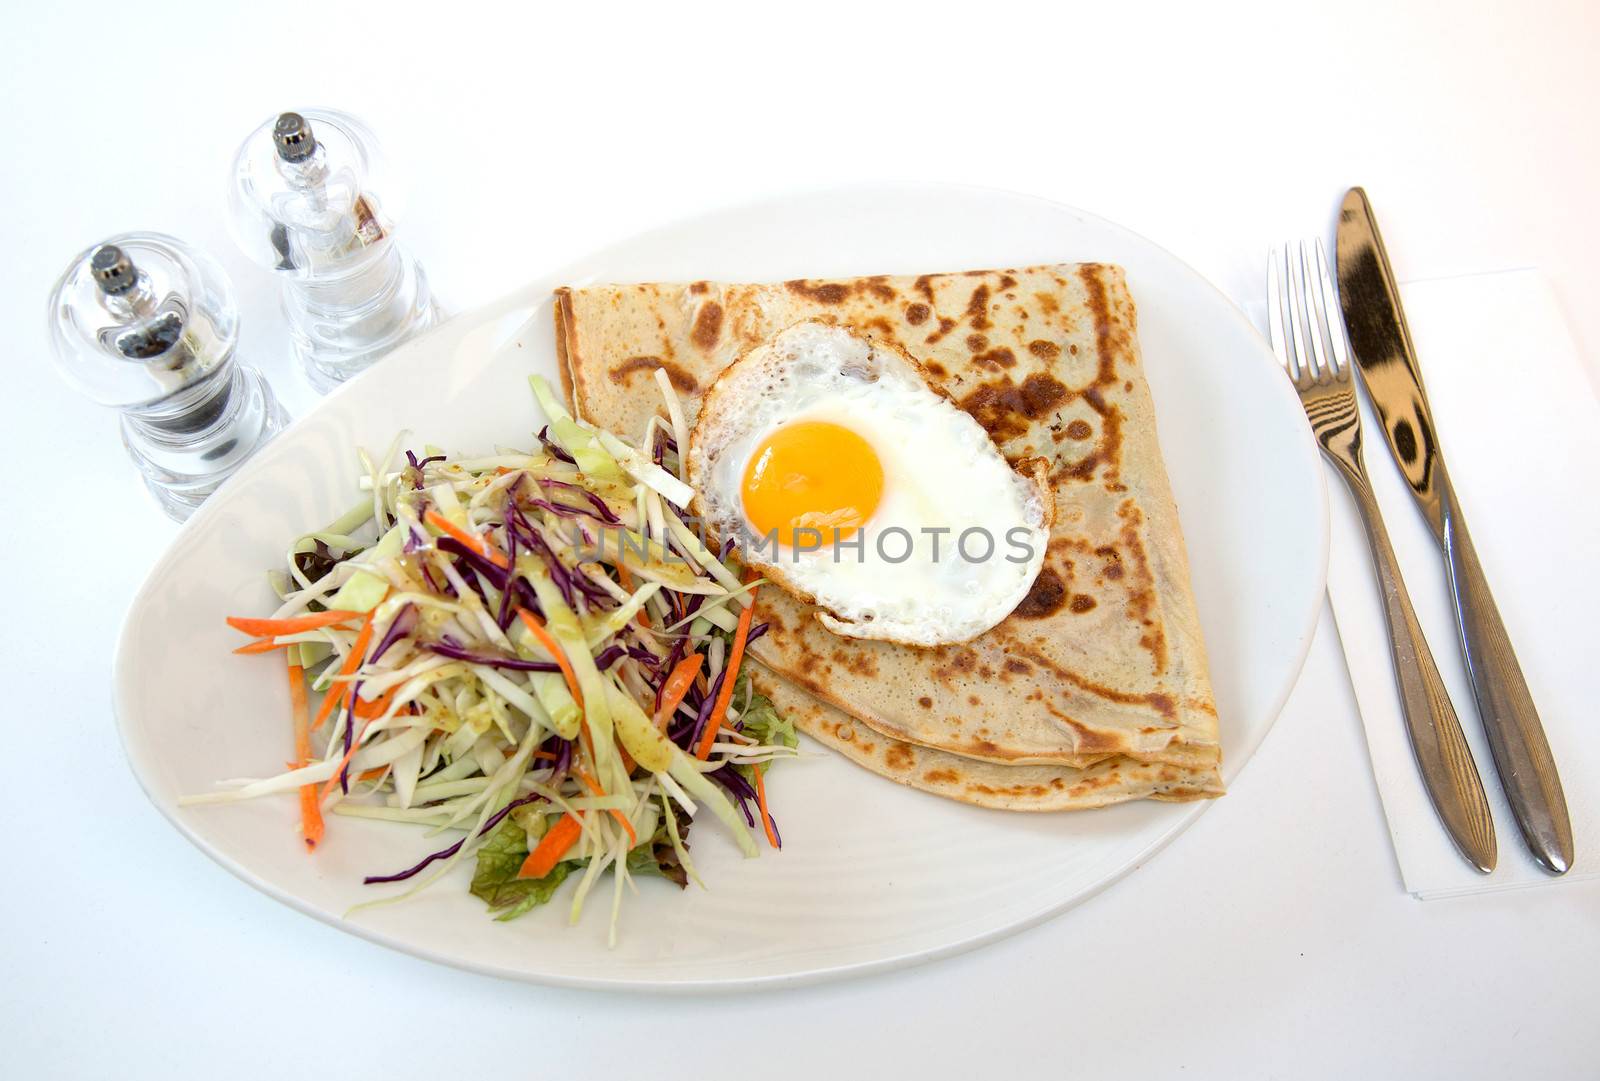 Fried eggs with coleslaw served for delicious brunch